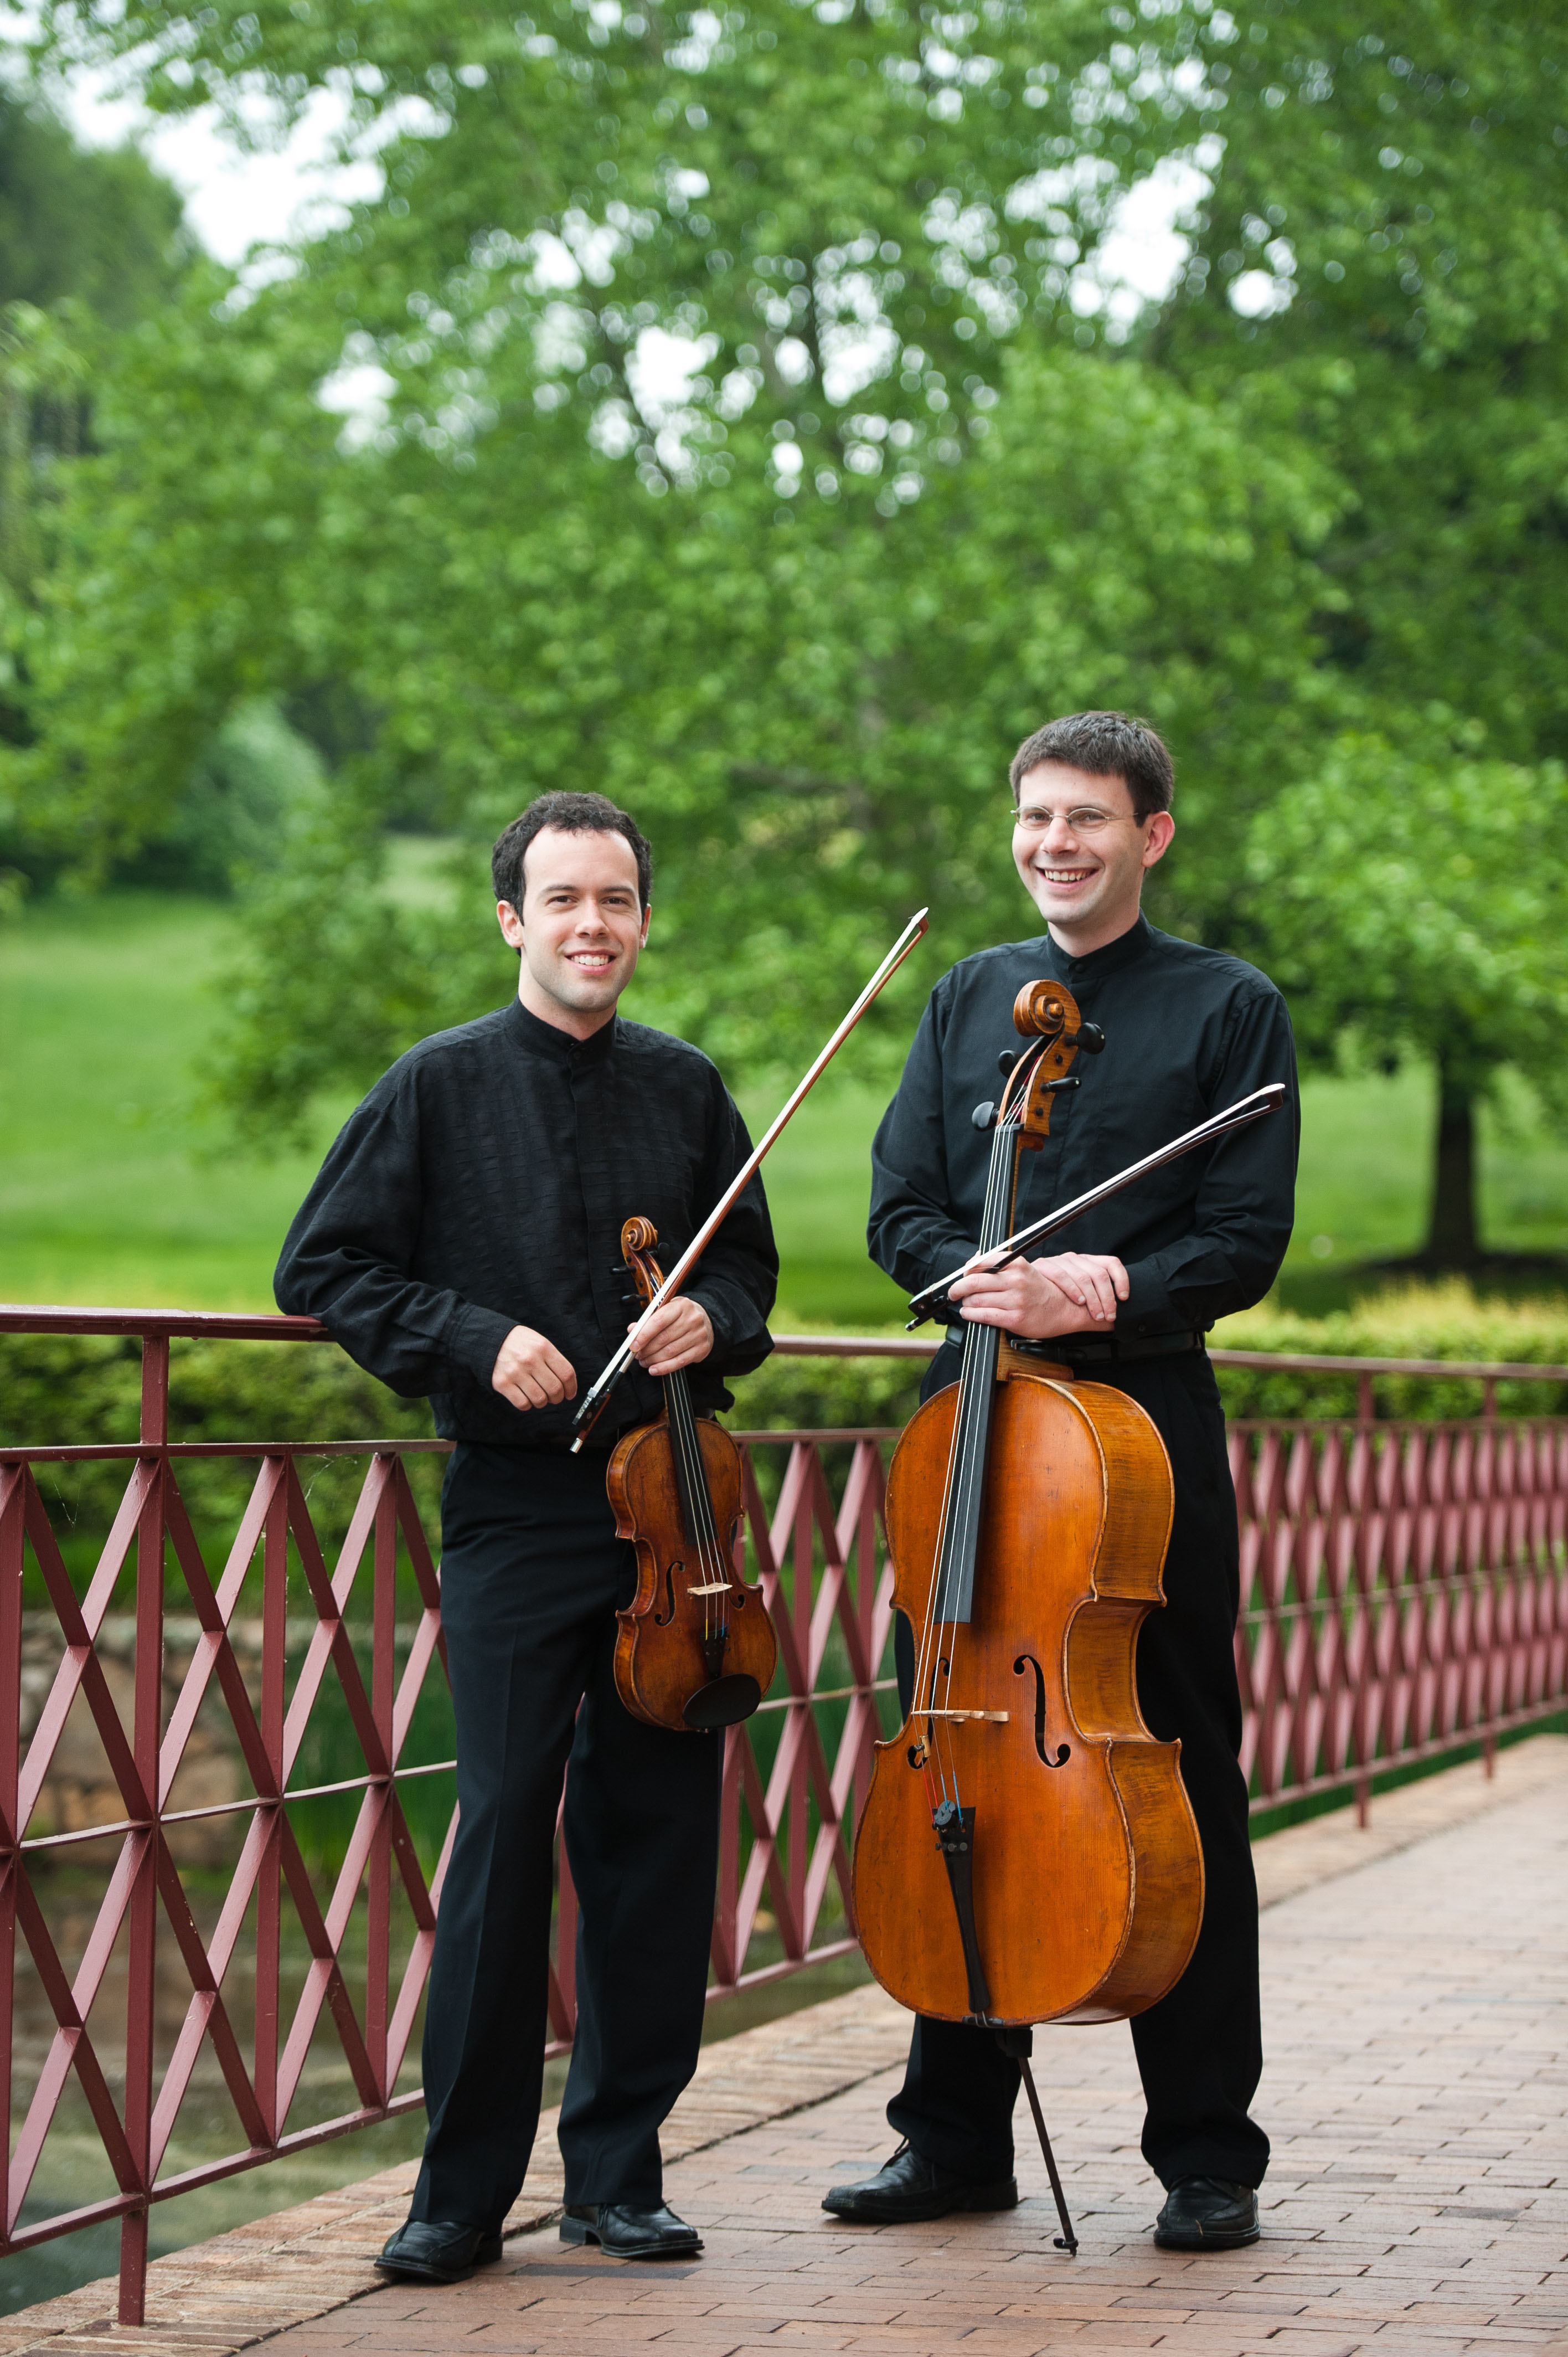 David Colwell, left, and Adam Carter, right stand with their musical instruments and smile at the camera